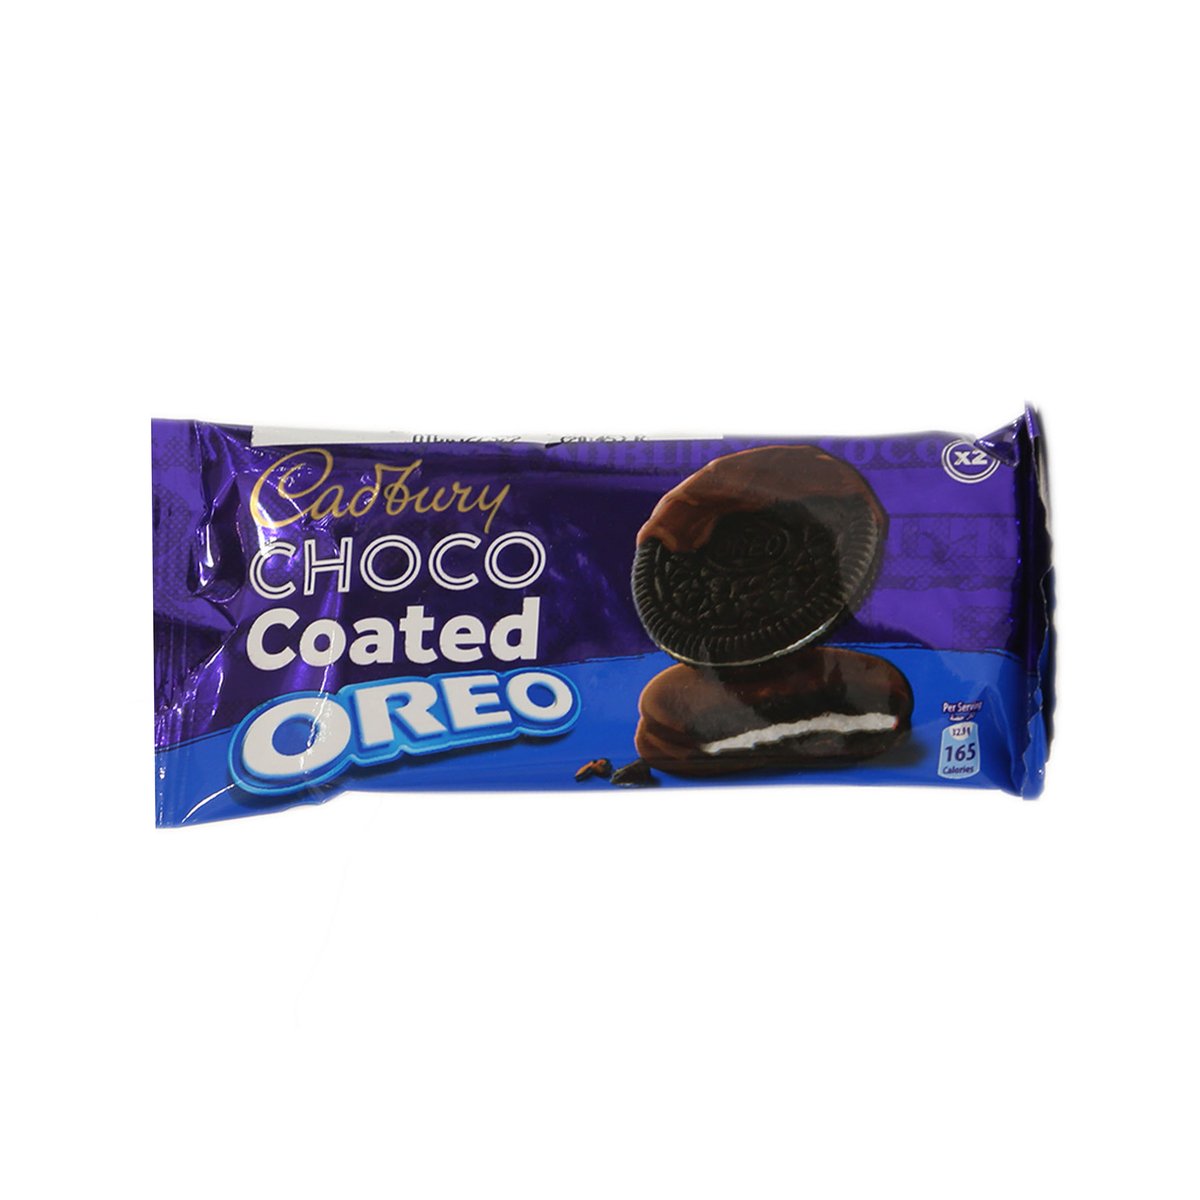 Oreo Nabisco Chocolate Covered Biscuit 32.9 g